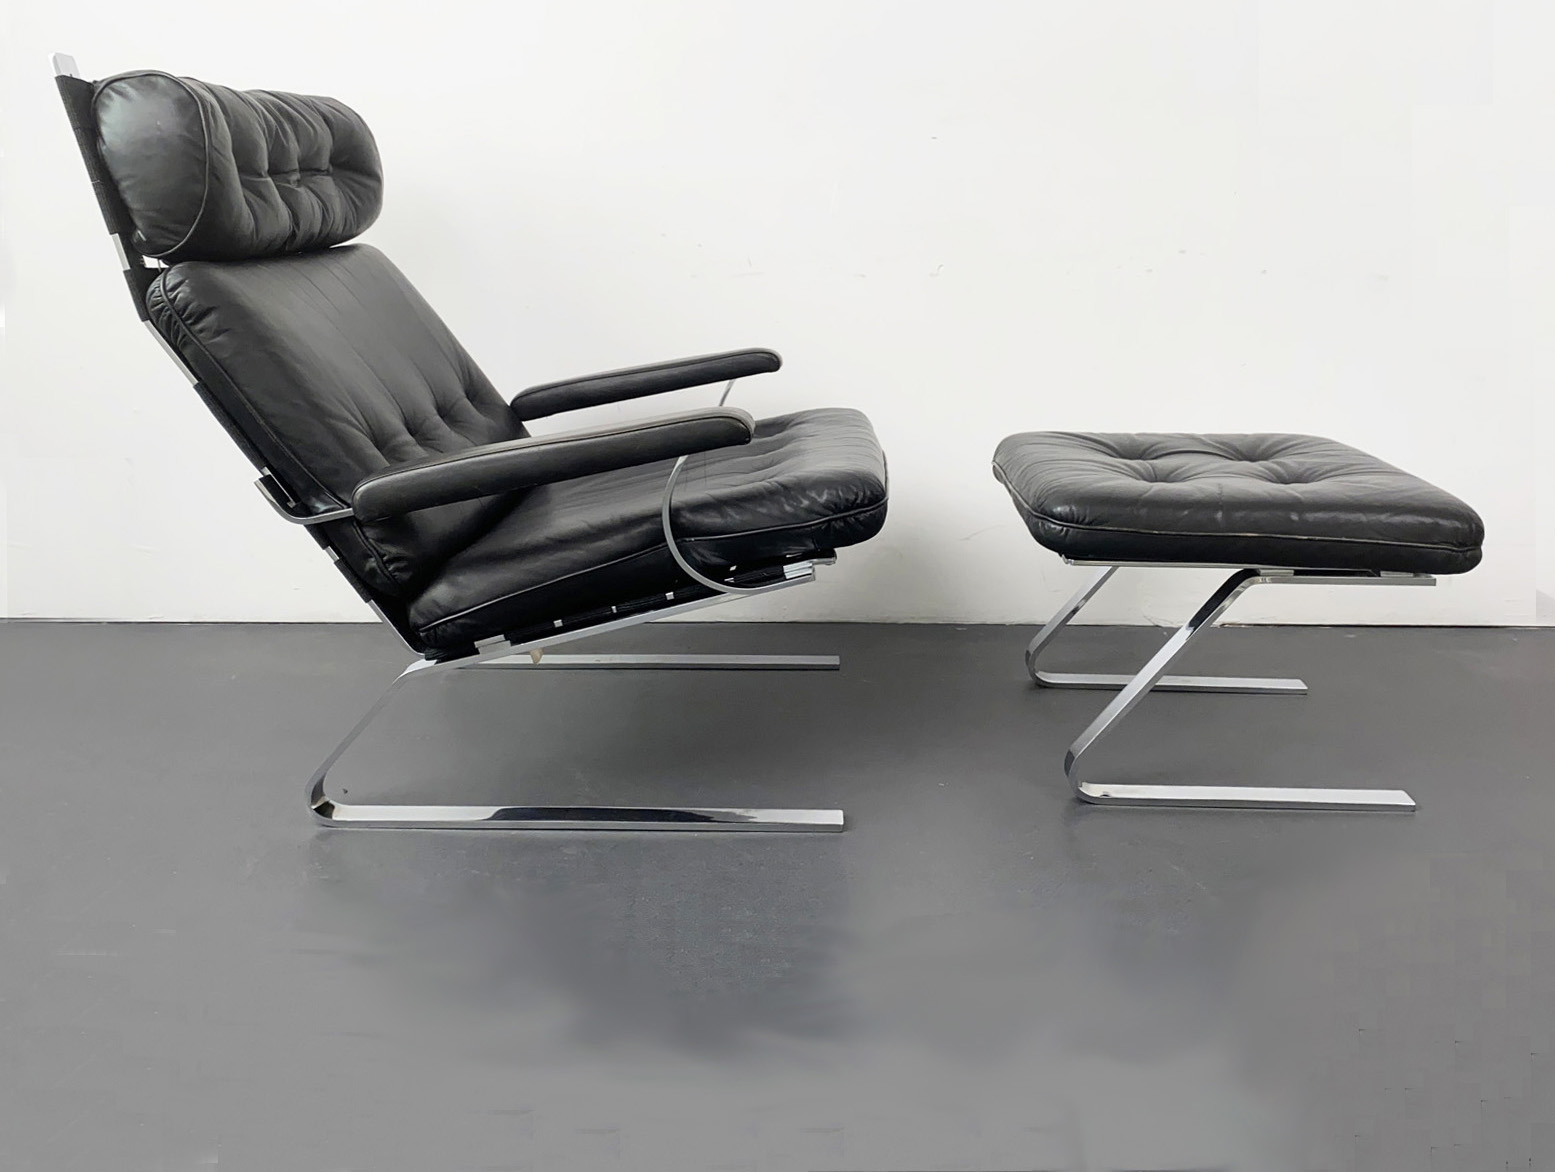 Lounge Arm Chair with Ottoman, black Leather, Chrome Frame, Germany, 60s.